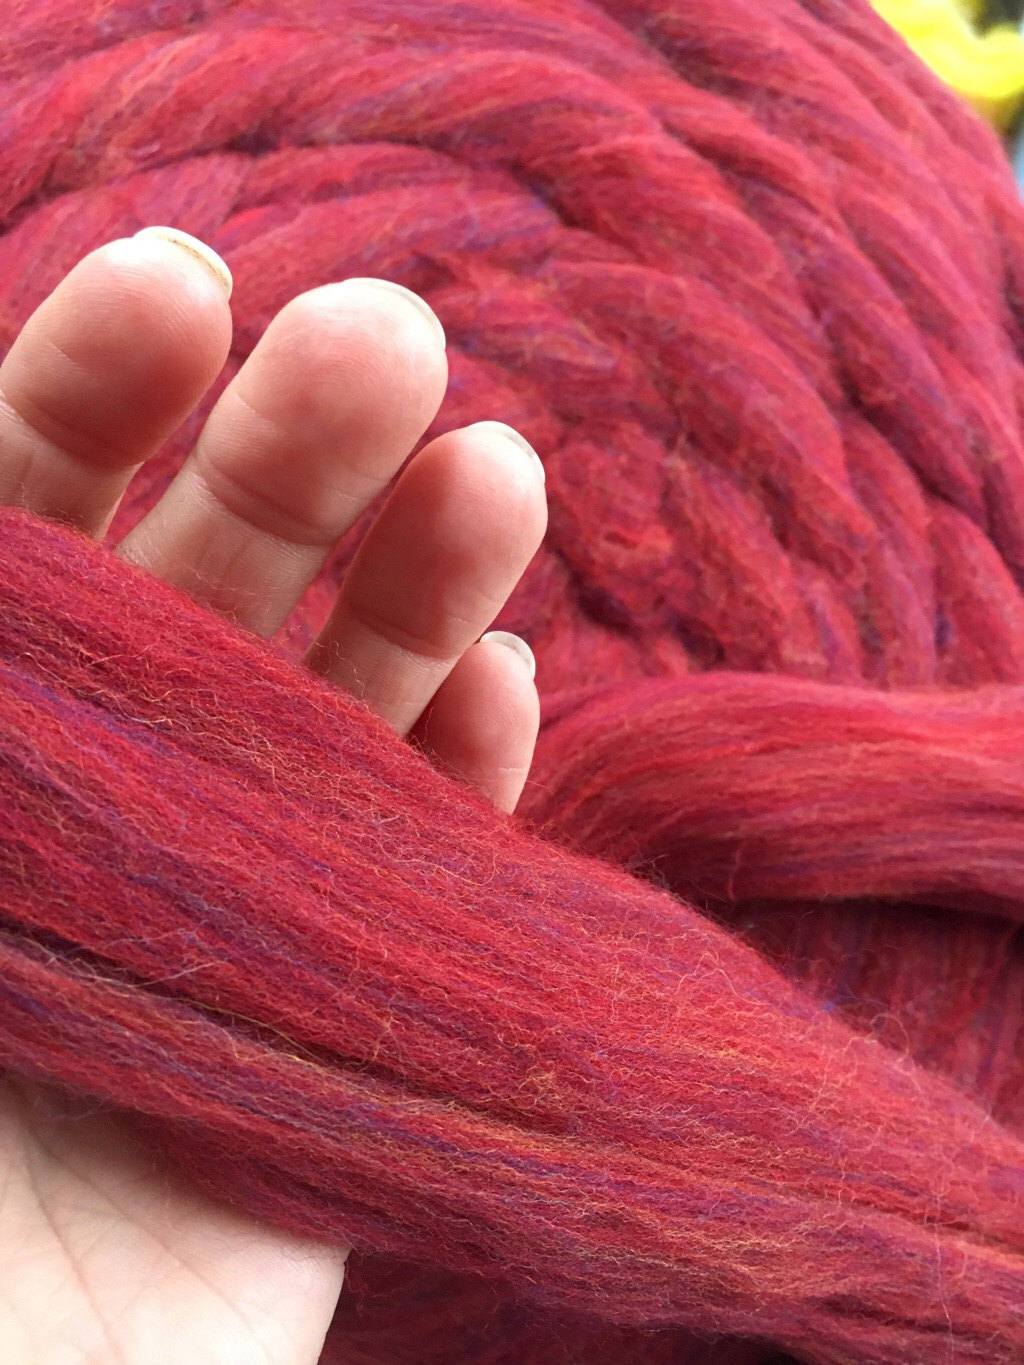 Persian Red Merino  Wool Top Roving - Spin into Yarn, Needle Felt wet felt, weave, knit, all Crafts